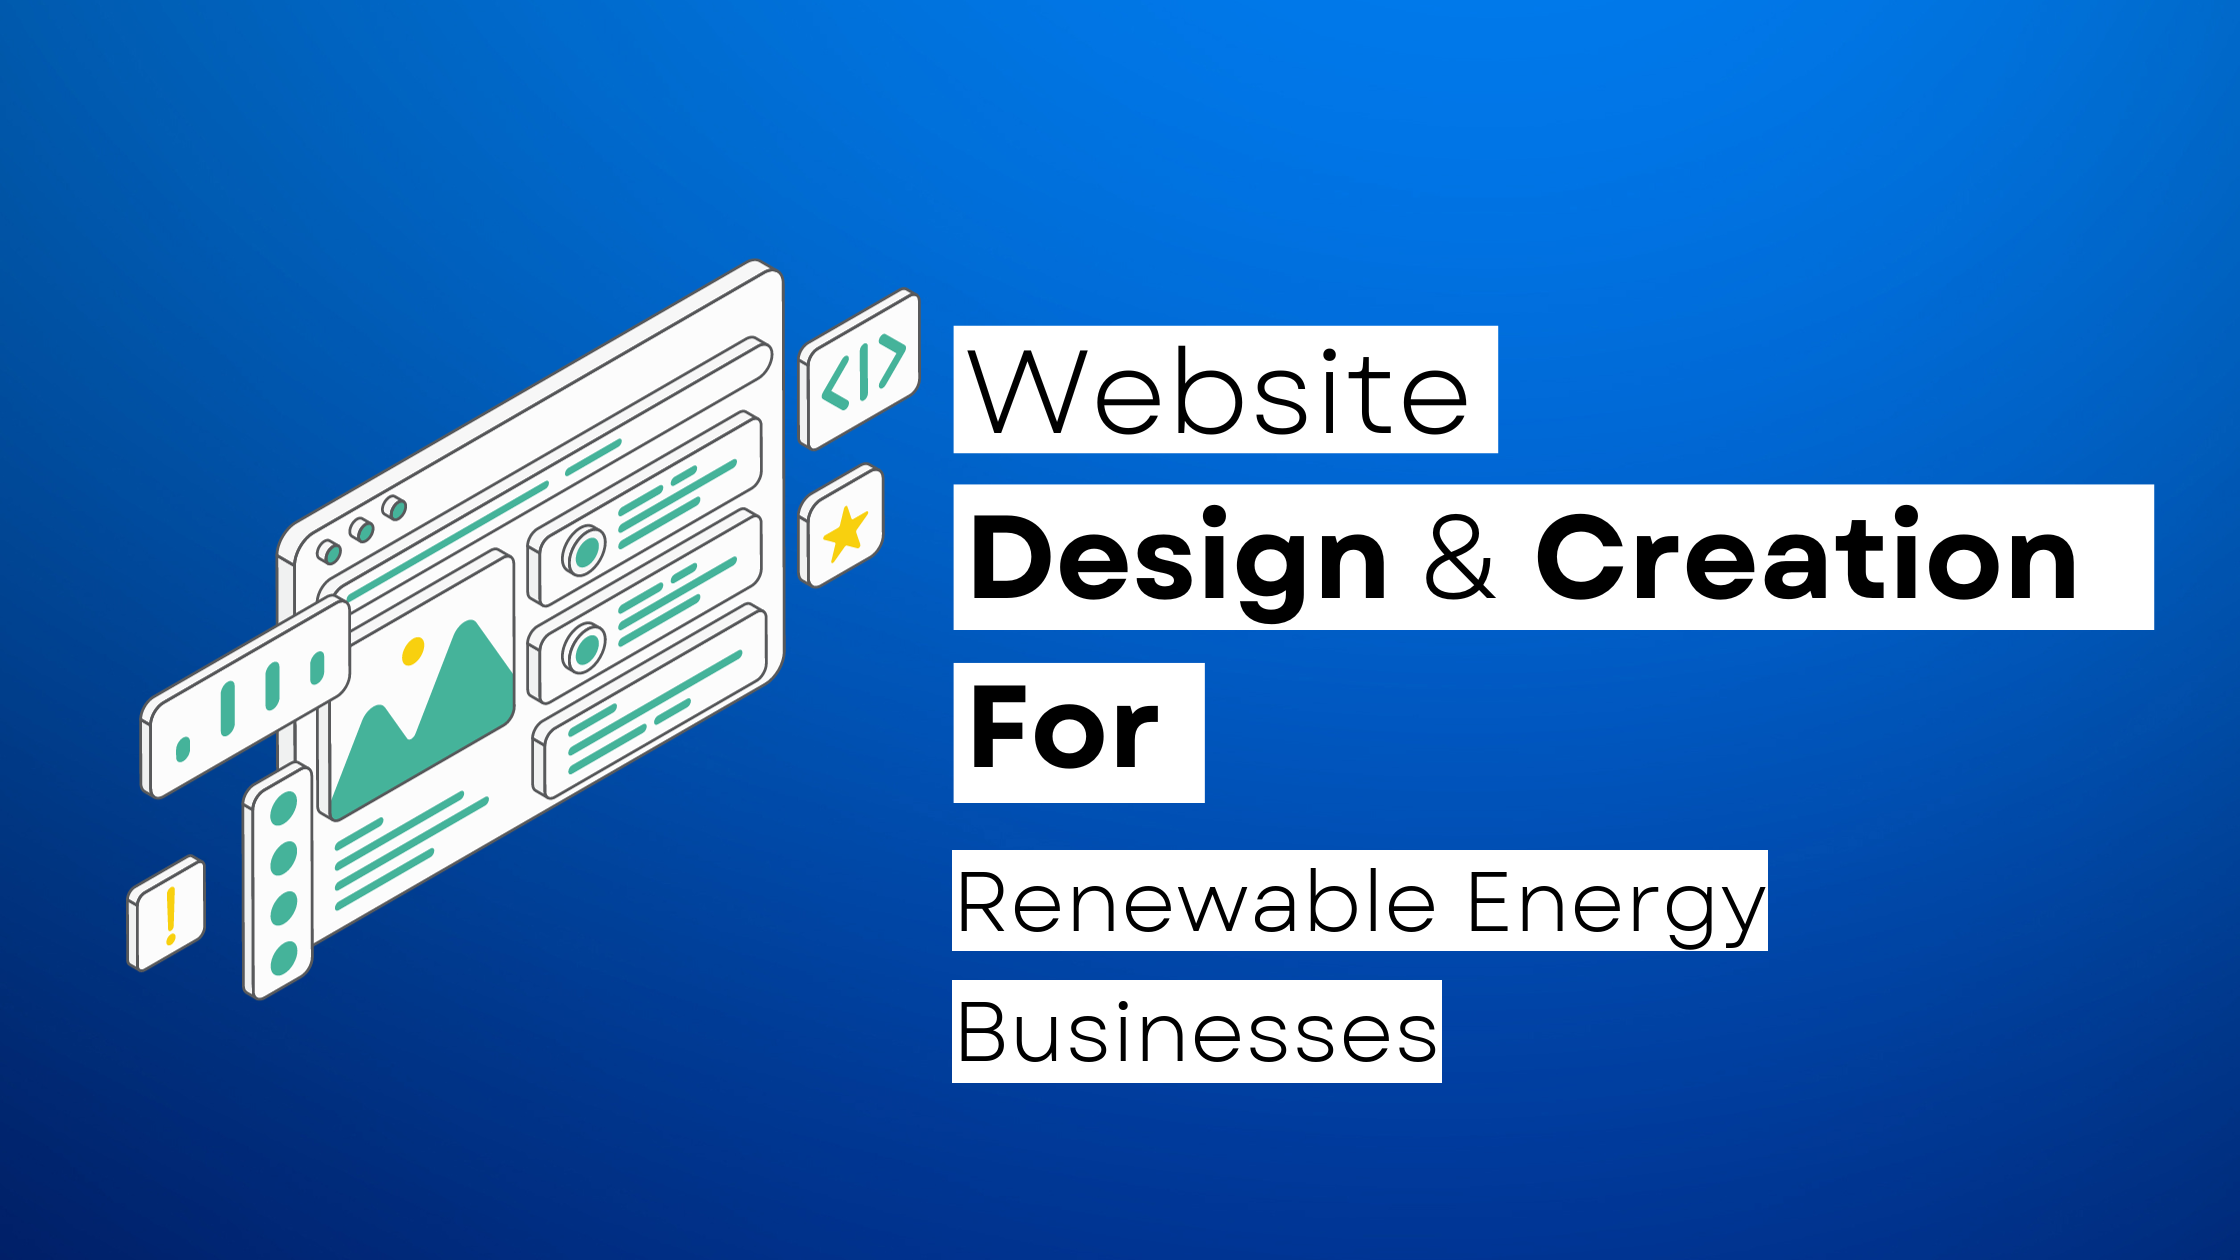 How to start a Renewable Energy website